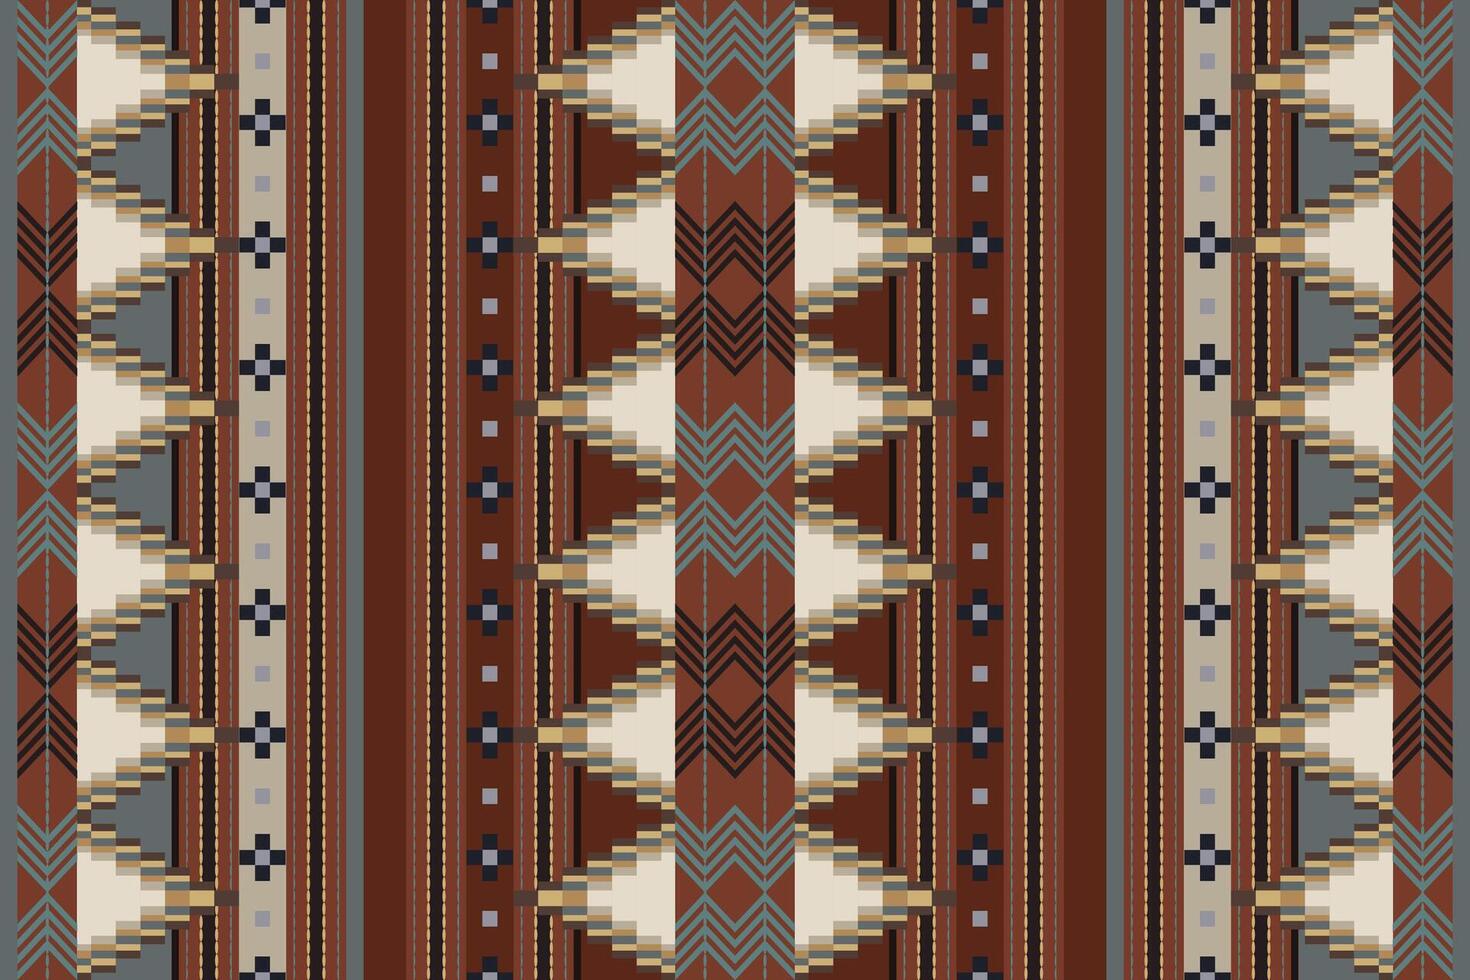 Navajo tribal vector seamless pattern. Native American ornament. Ethnic South Western decor style. Boho geometric ornament. Vector seamless pattern. Mexican blanket, rug. Woven carpet illustration.